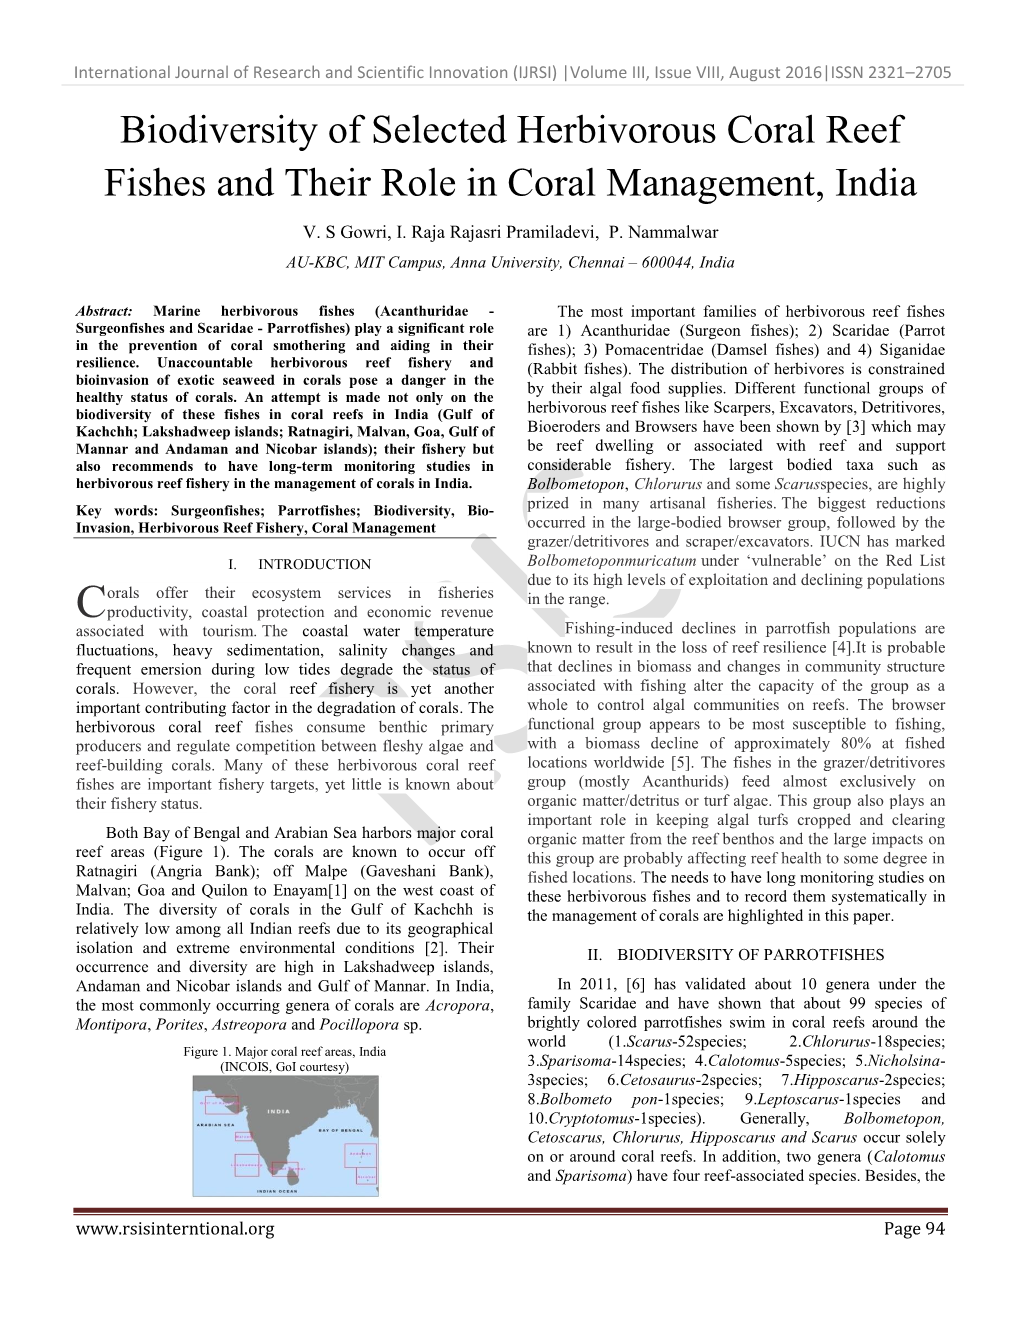 Biodiversity of Selected Herbivorous Coral Reef Fishes and Their Role in Coral Management, India